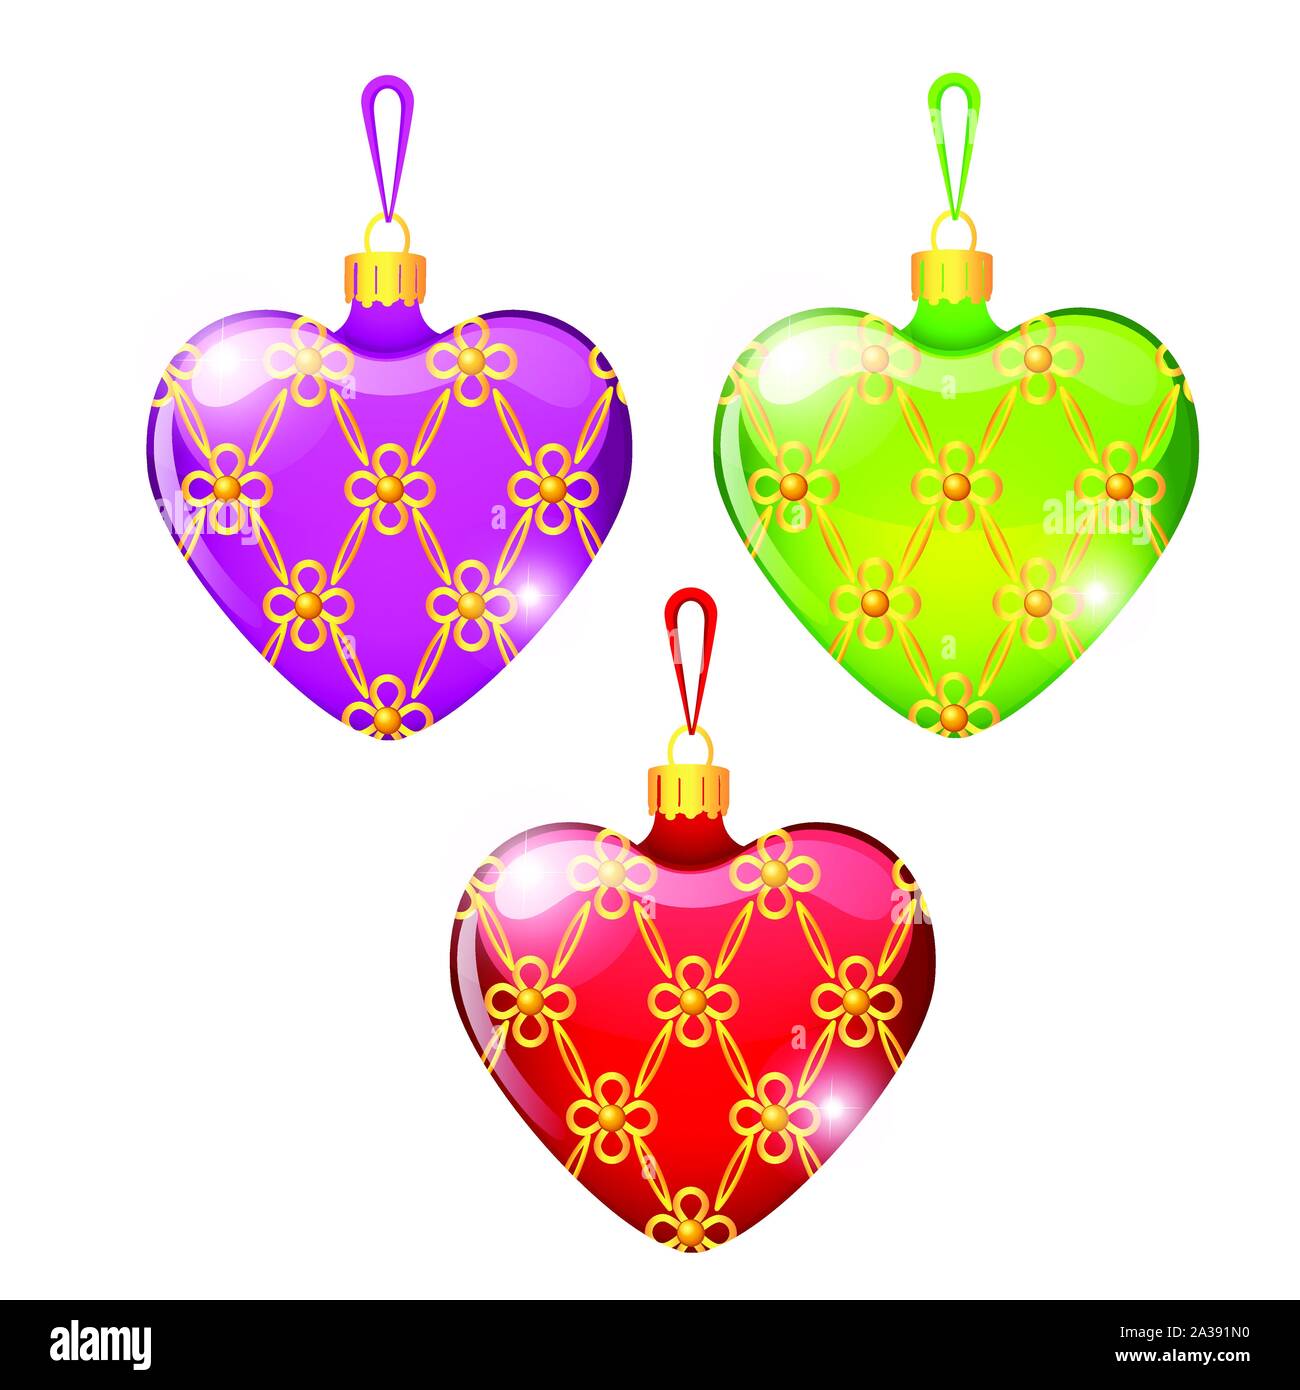 Sketch with Christmas tree decorations different forms isolated on white background. Colorful festive glass baubles. Template of poster, invitation Stock Vector